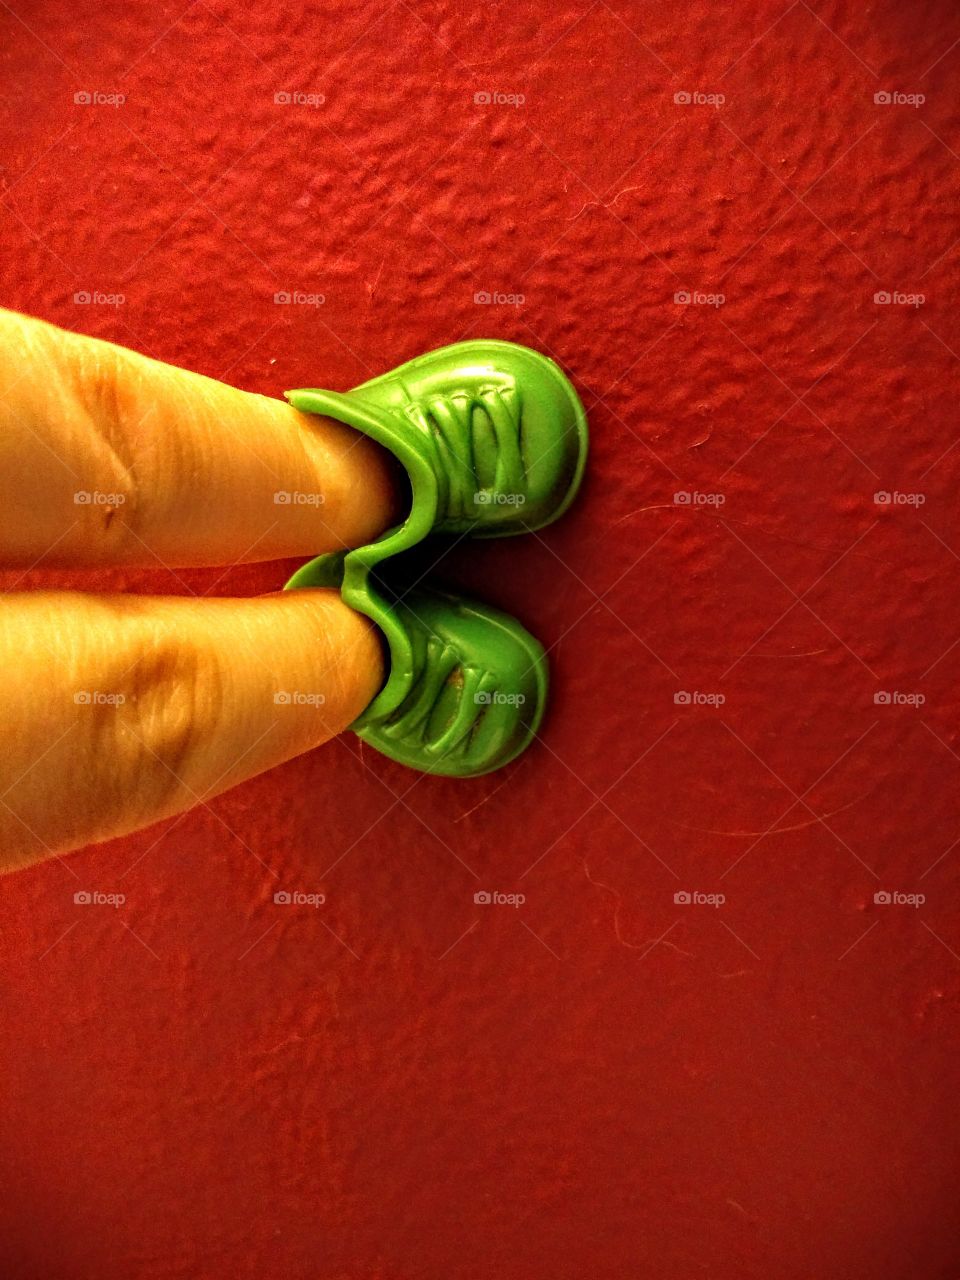 fingers inside of green toy shoes